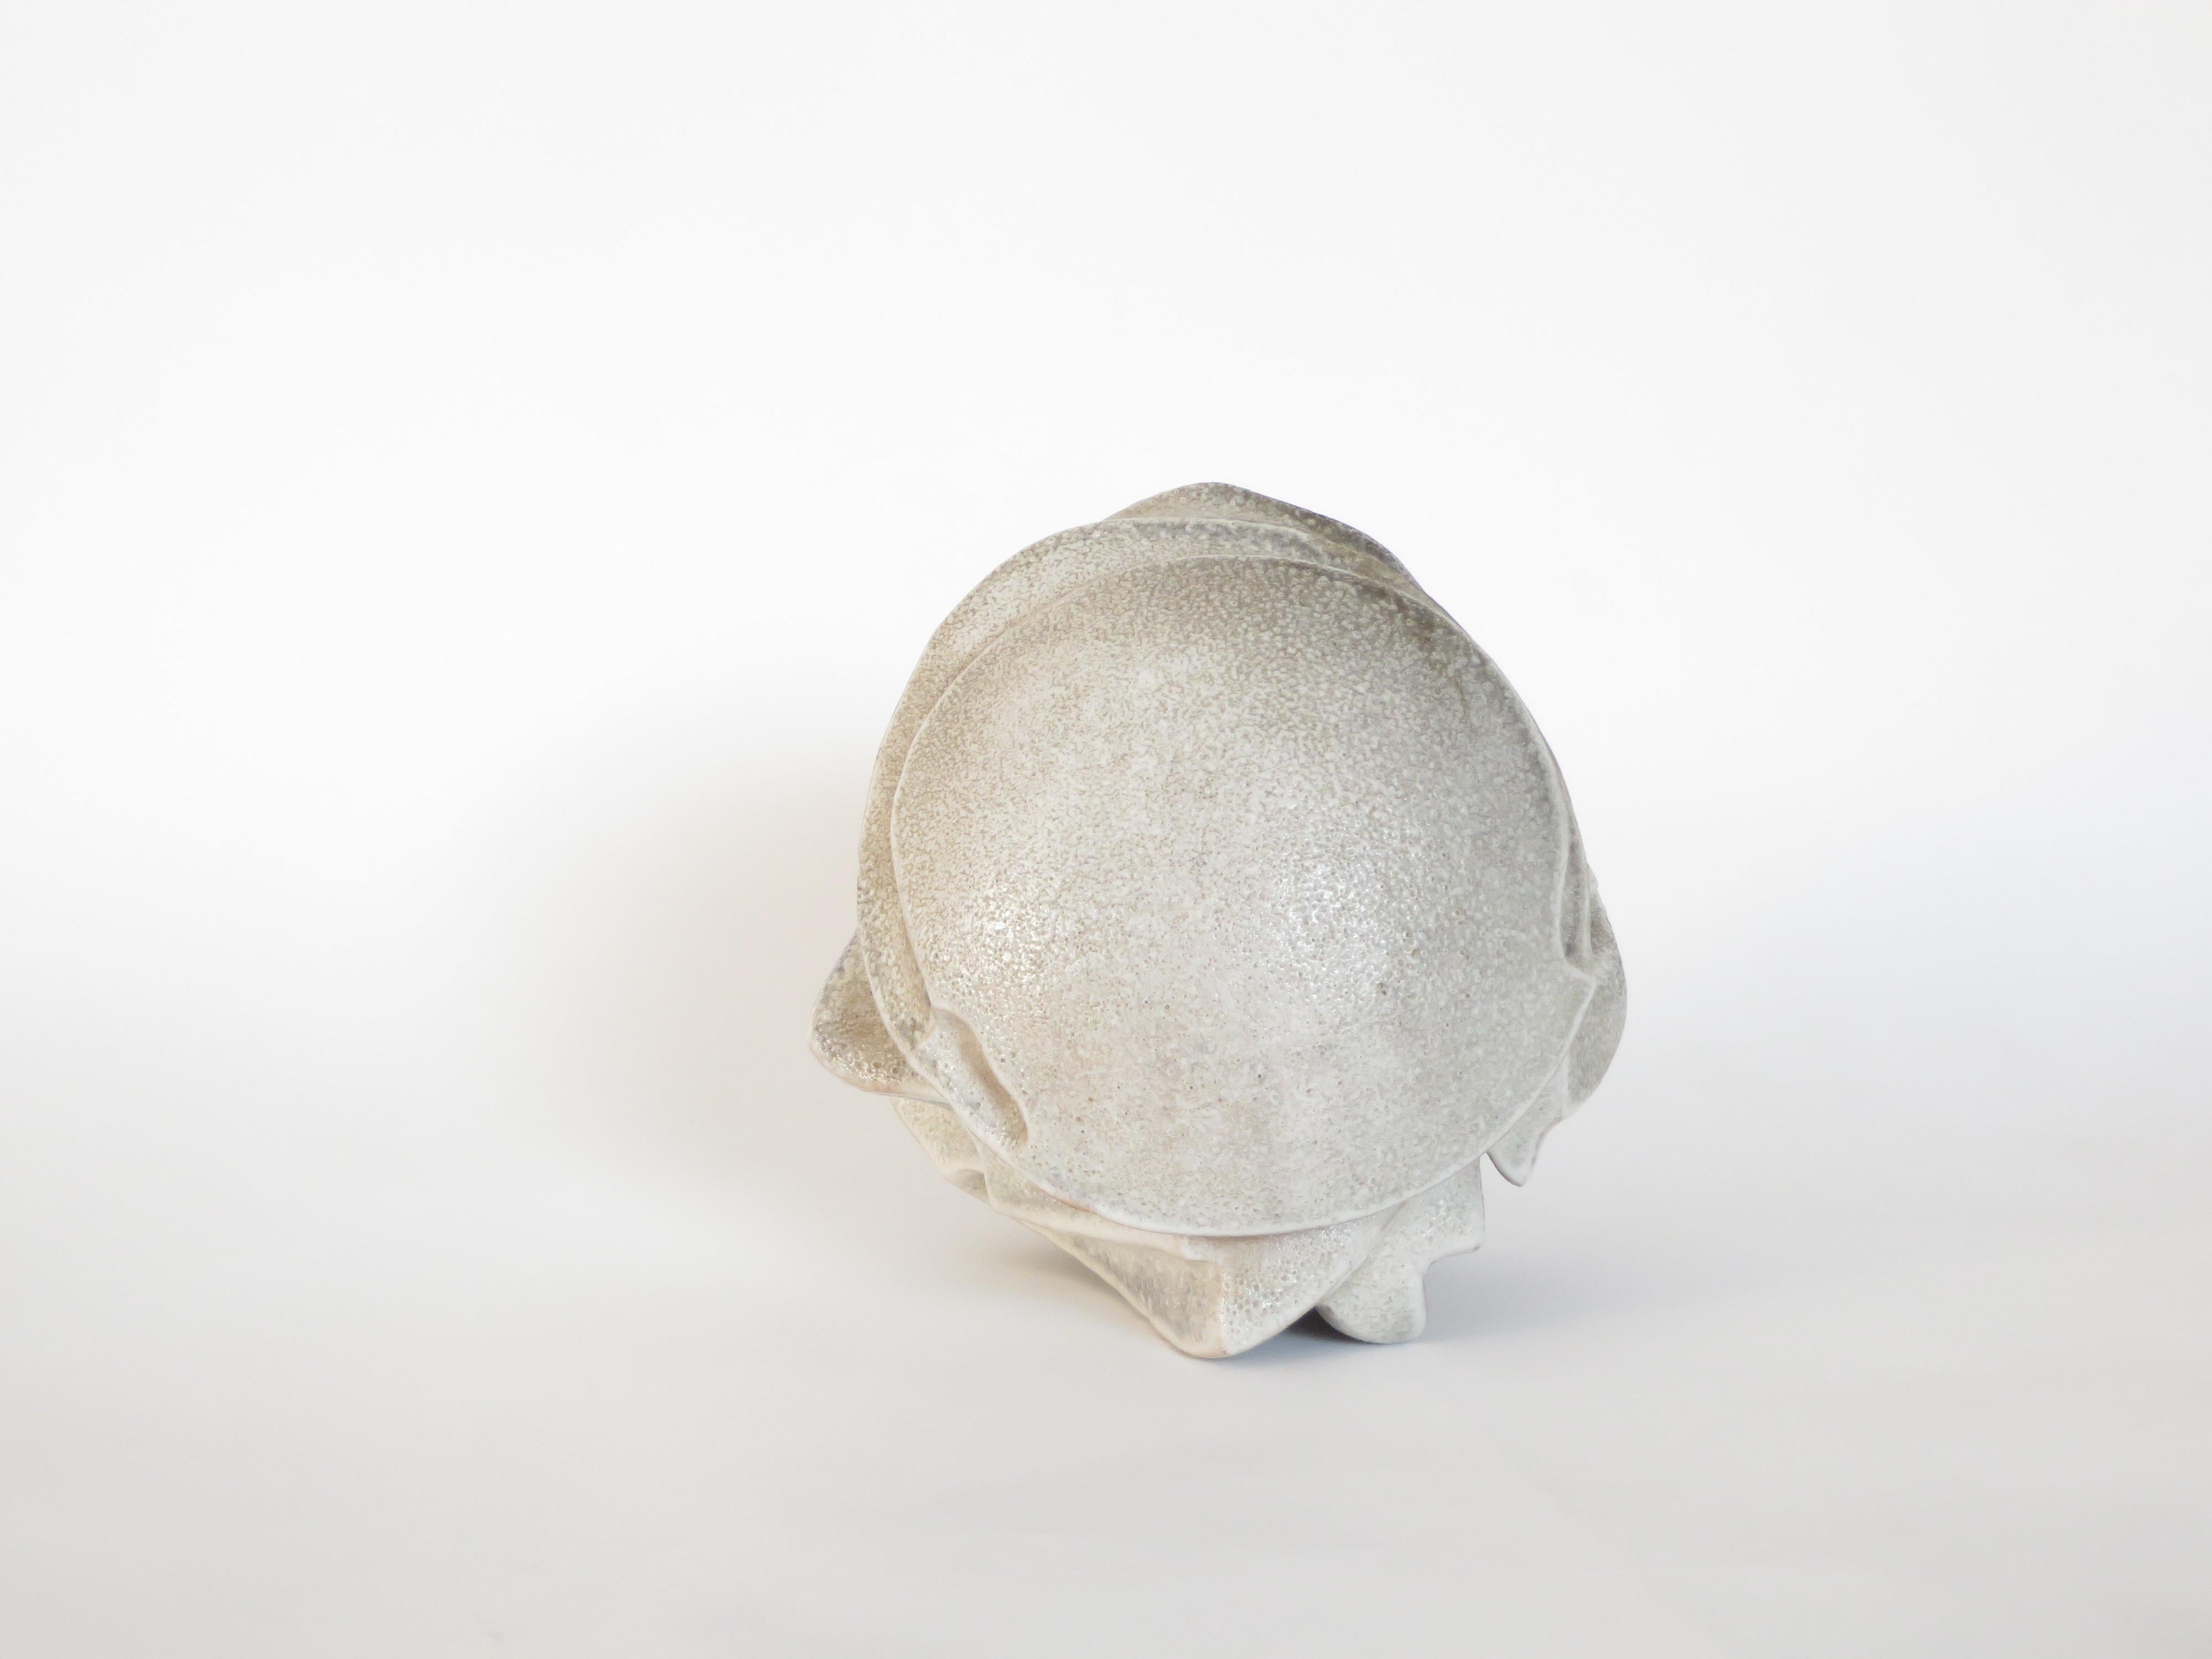 Ceramic sculpture by Carlo Zauli from the series 